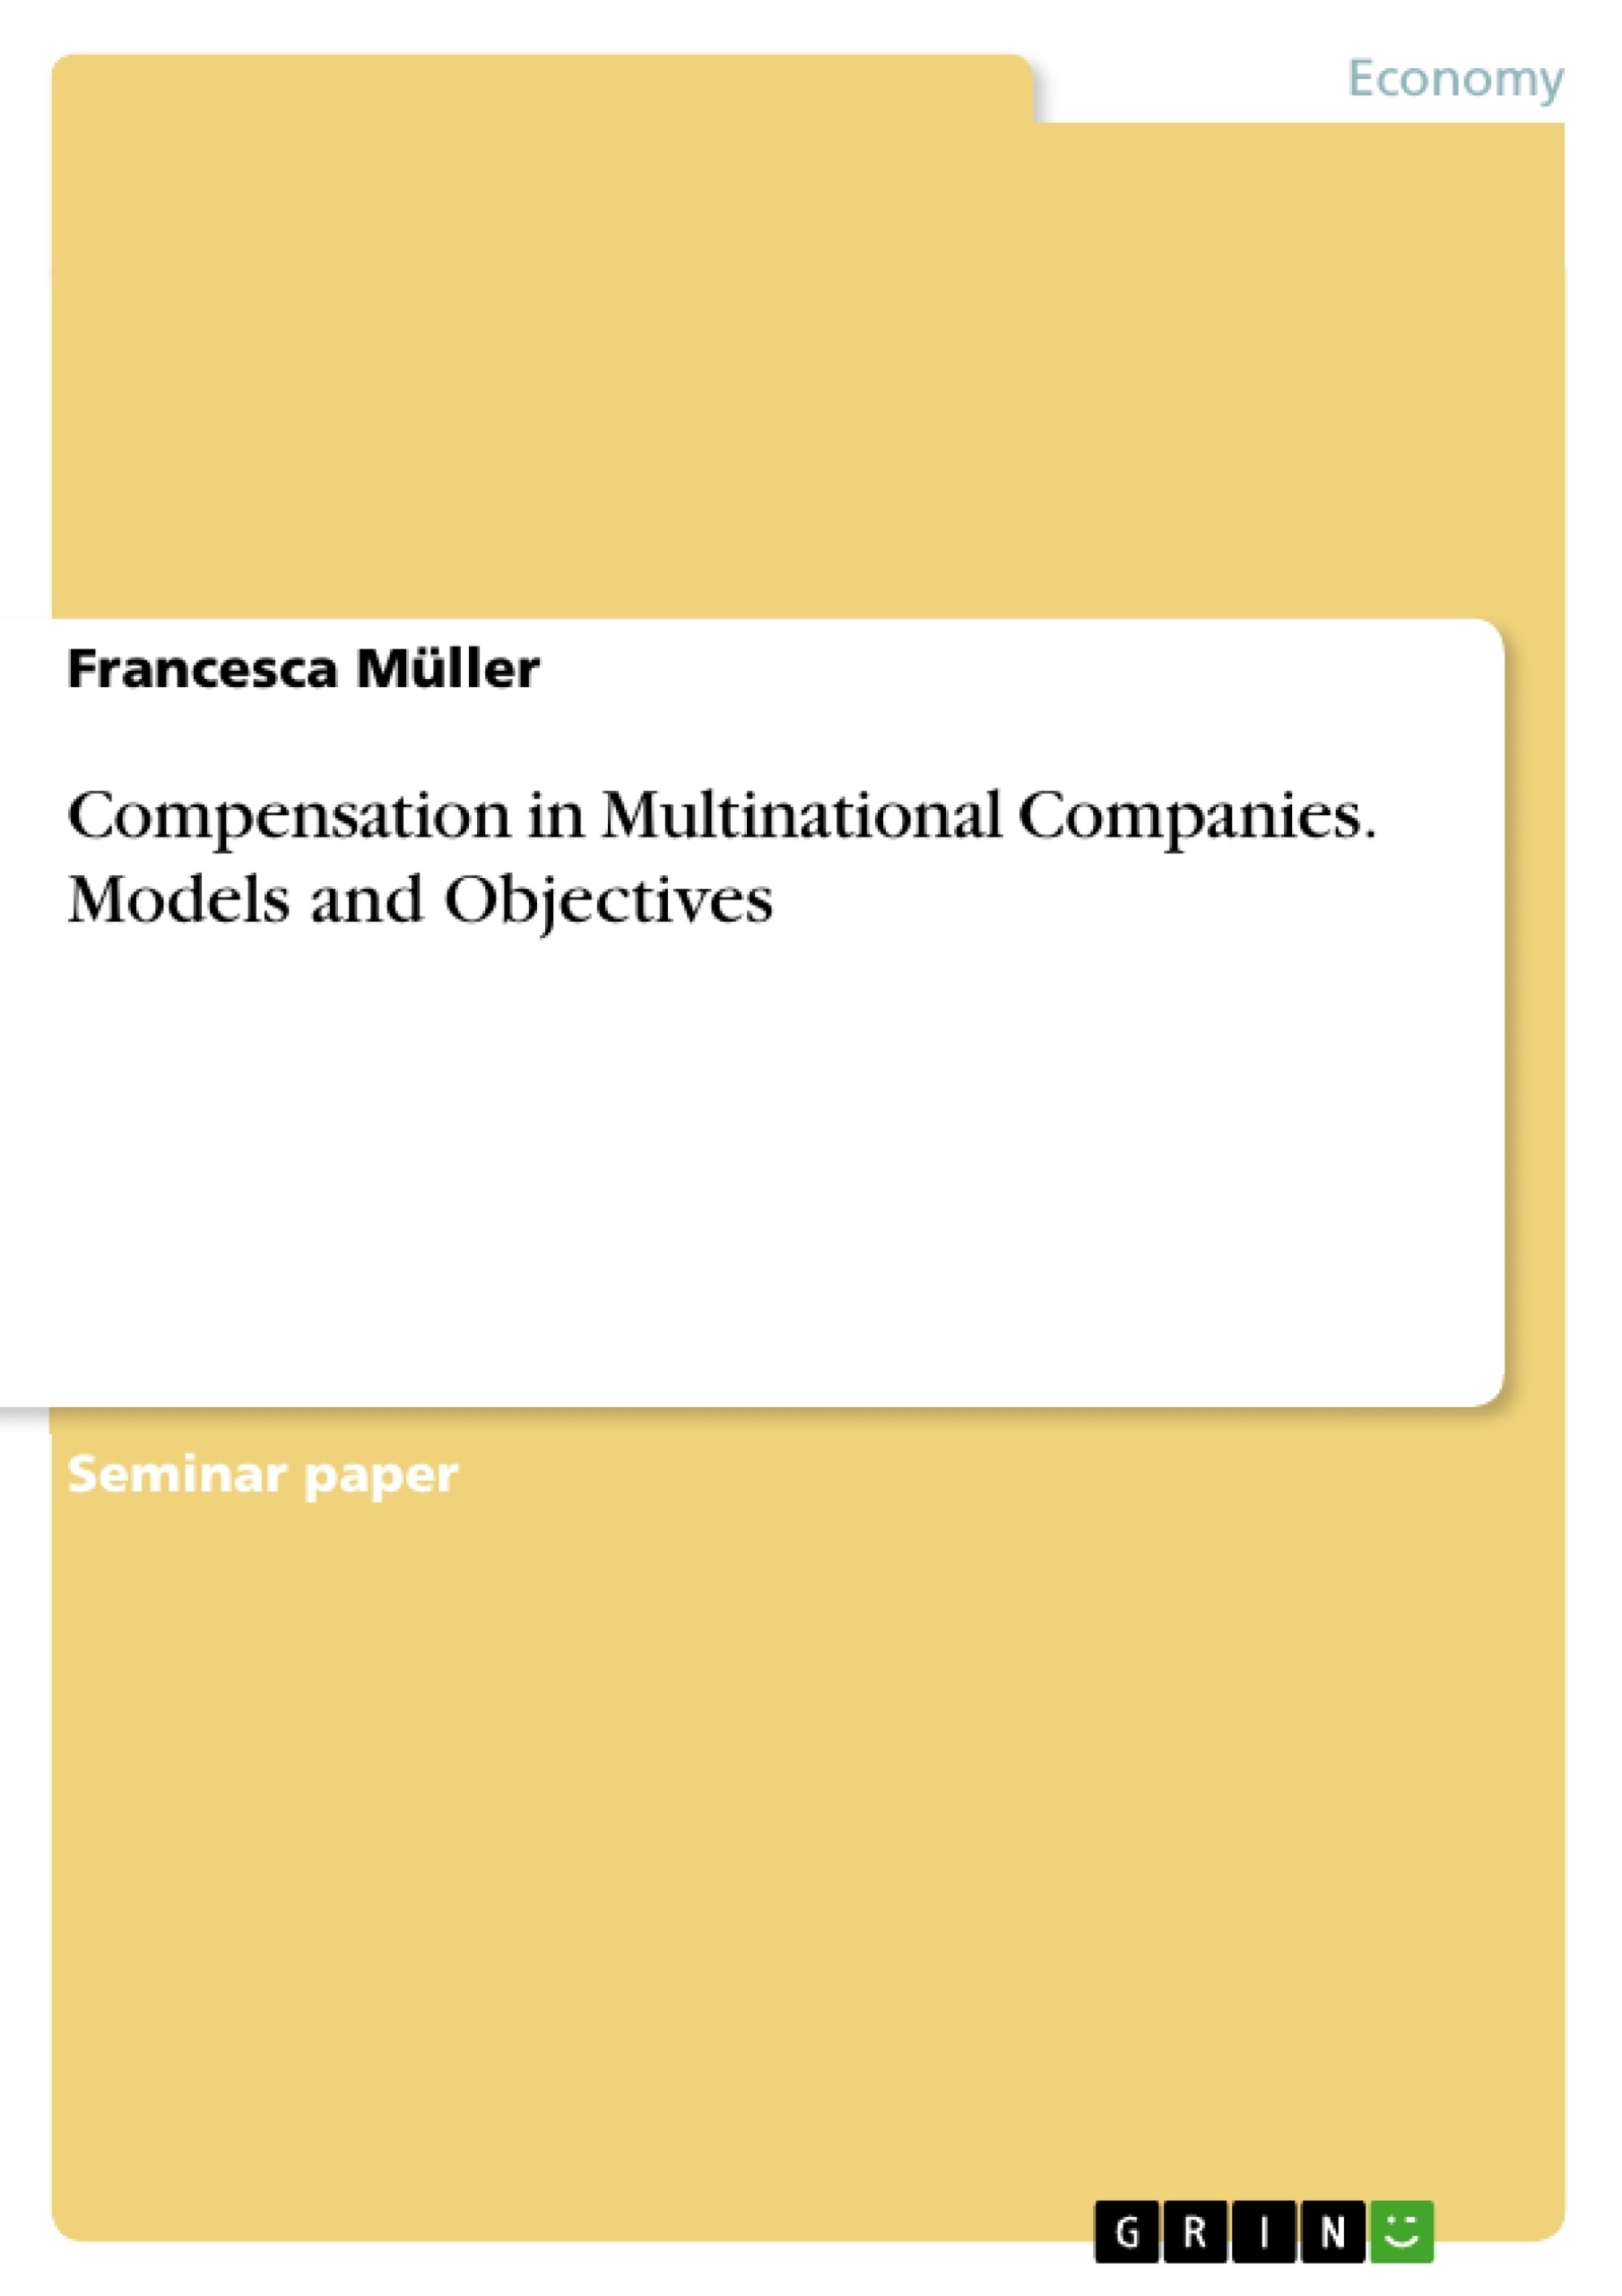 Título: Compensation in Multinational Companies. Models and Objectives